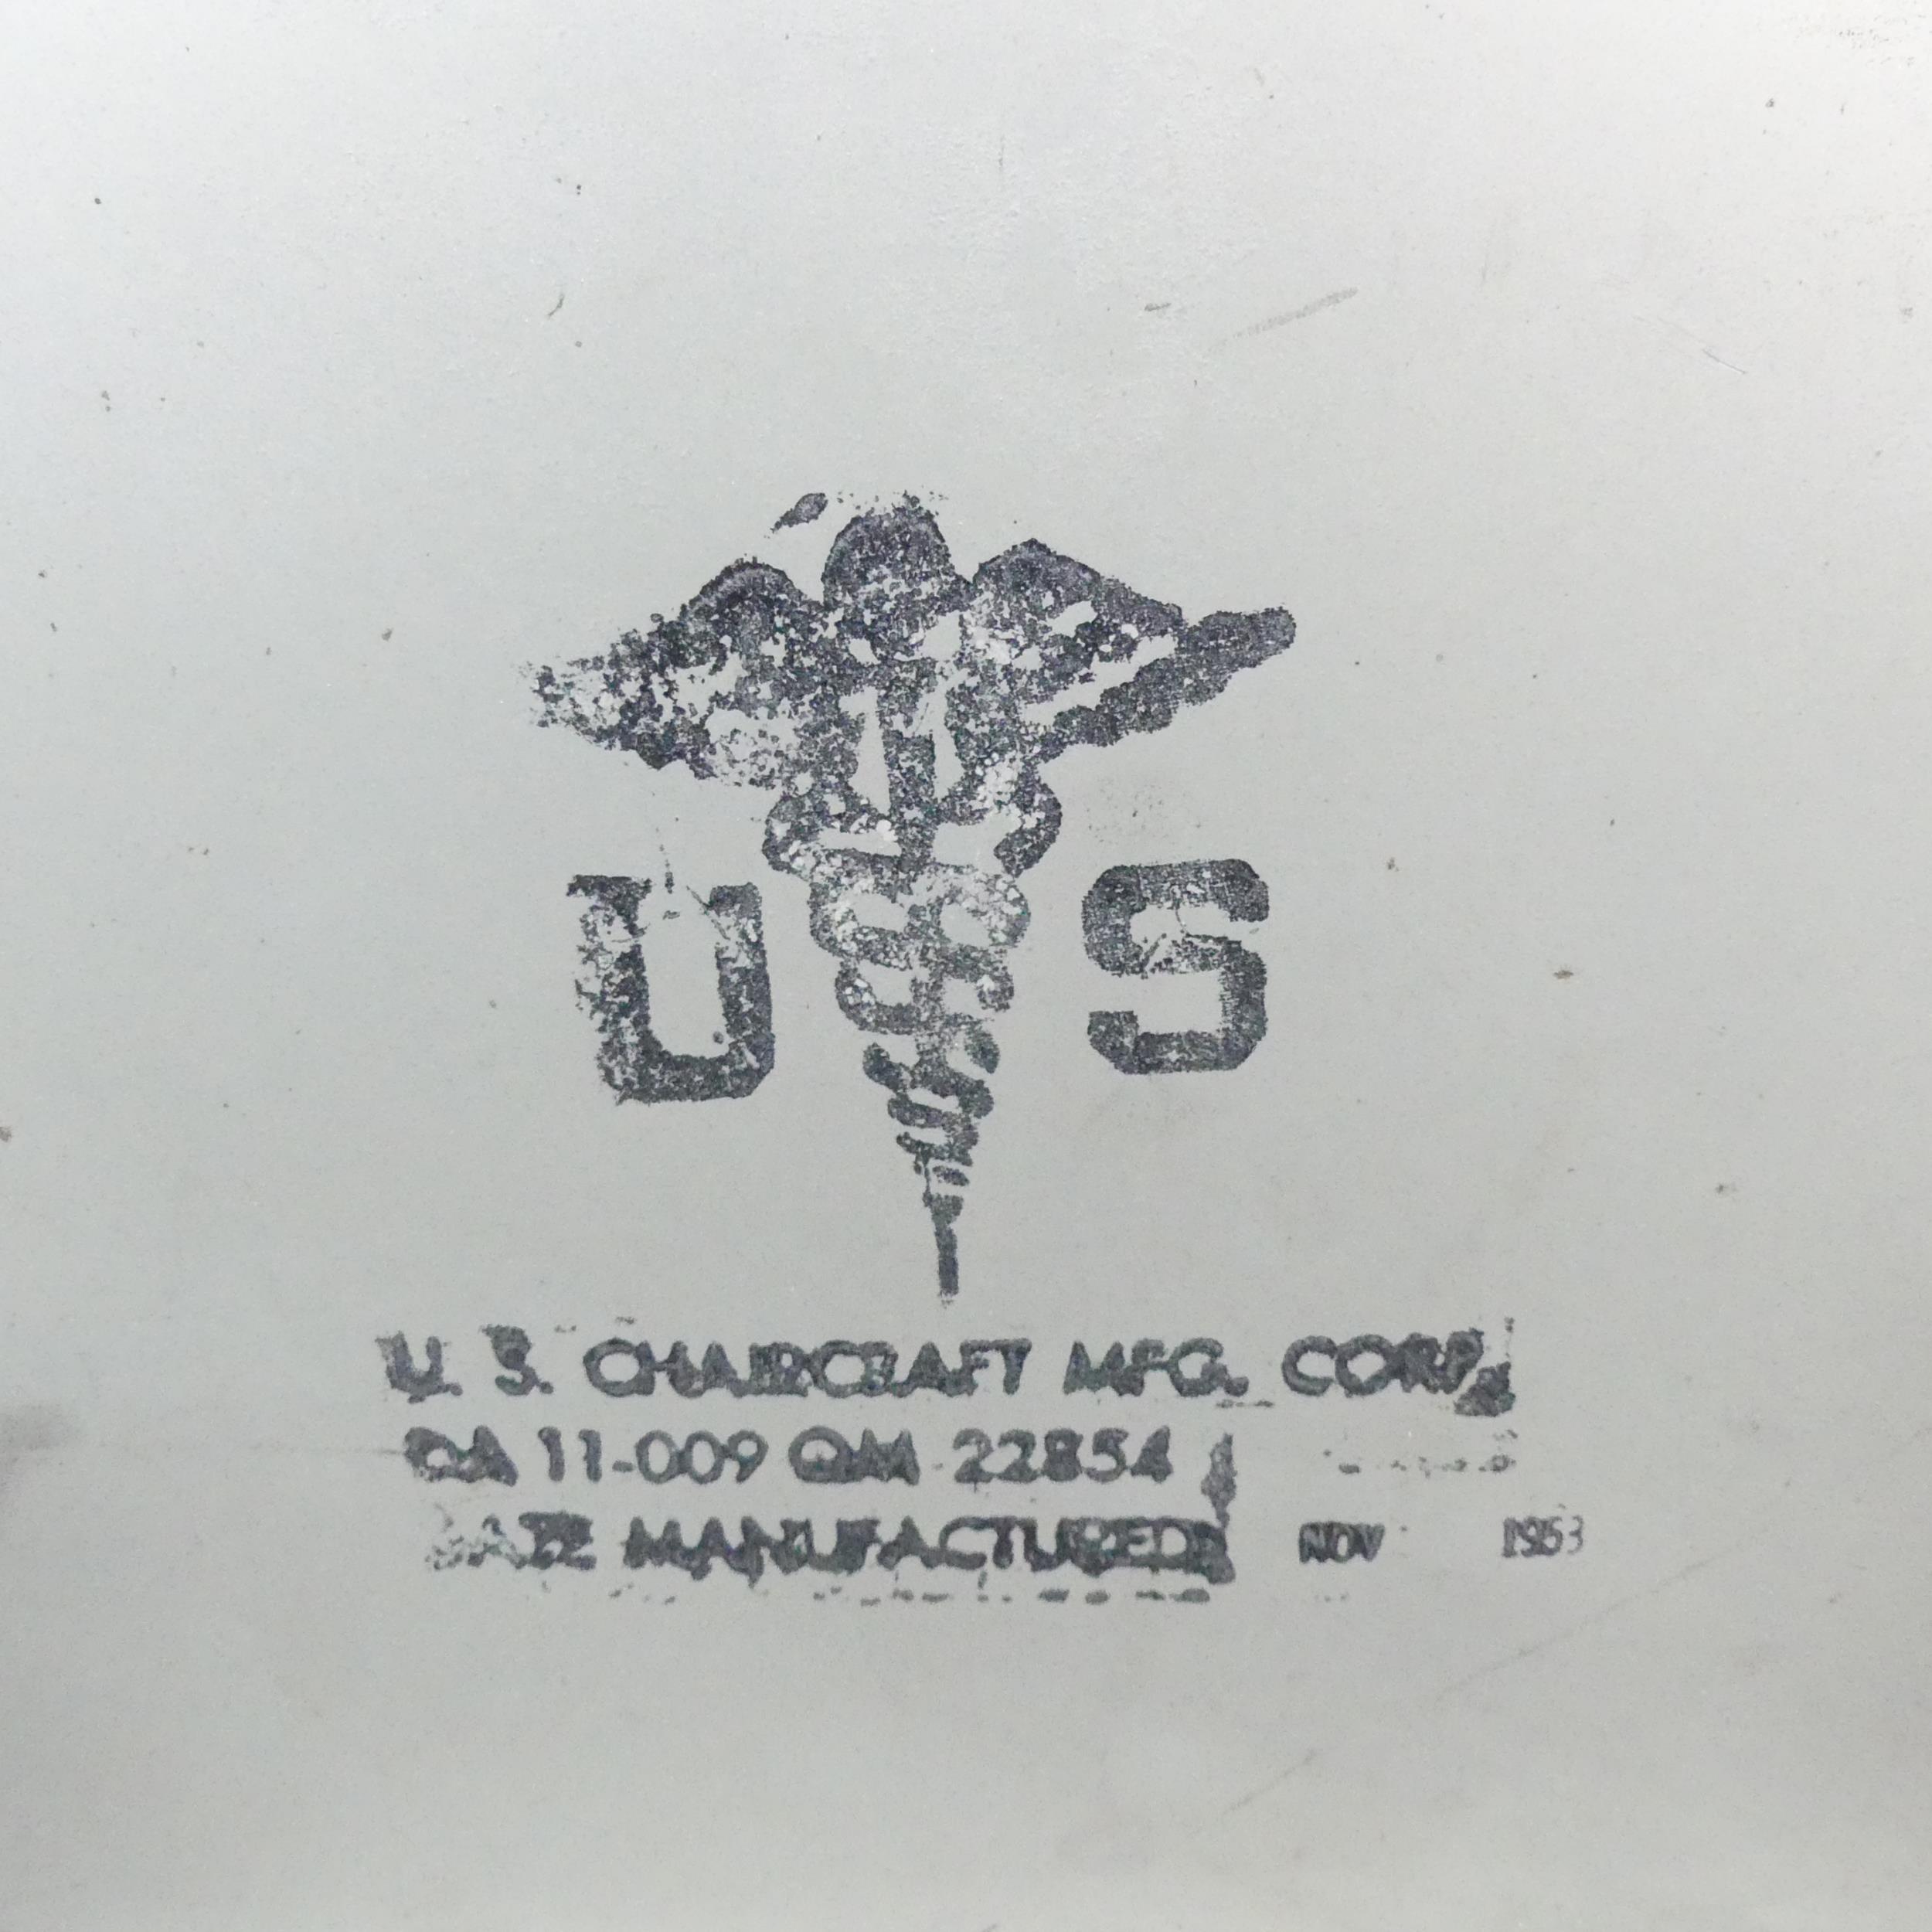 U.S CHAIRCRAFT - A 1953 US Army Medical Corps lounge chair, with aluminium frame and leather - Image 5 of 5